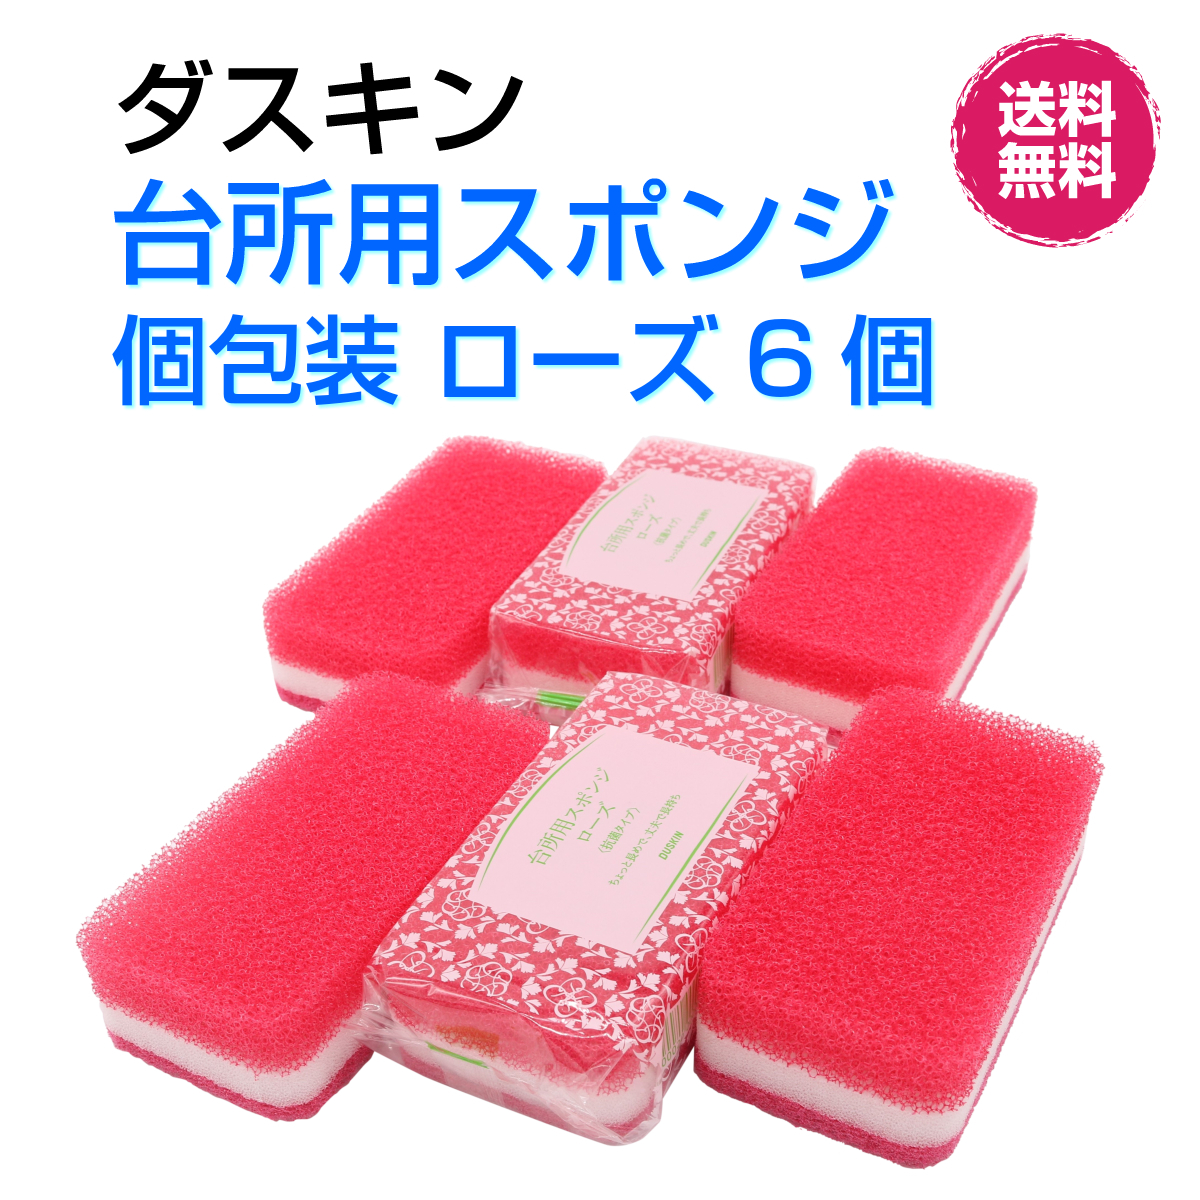 das gold kitchen for sponge anti-bacterial type { rose piece packing 6 piece } great popularity vitamin robust long-lasting the lowest price new life moving greeting duskin